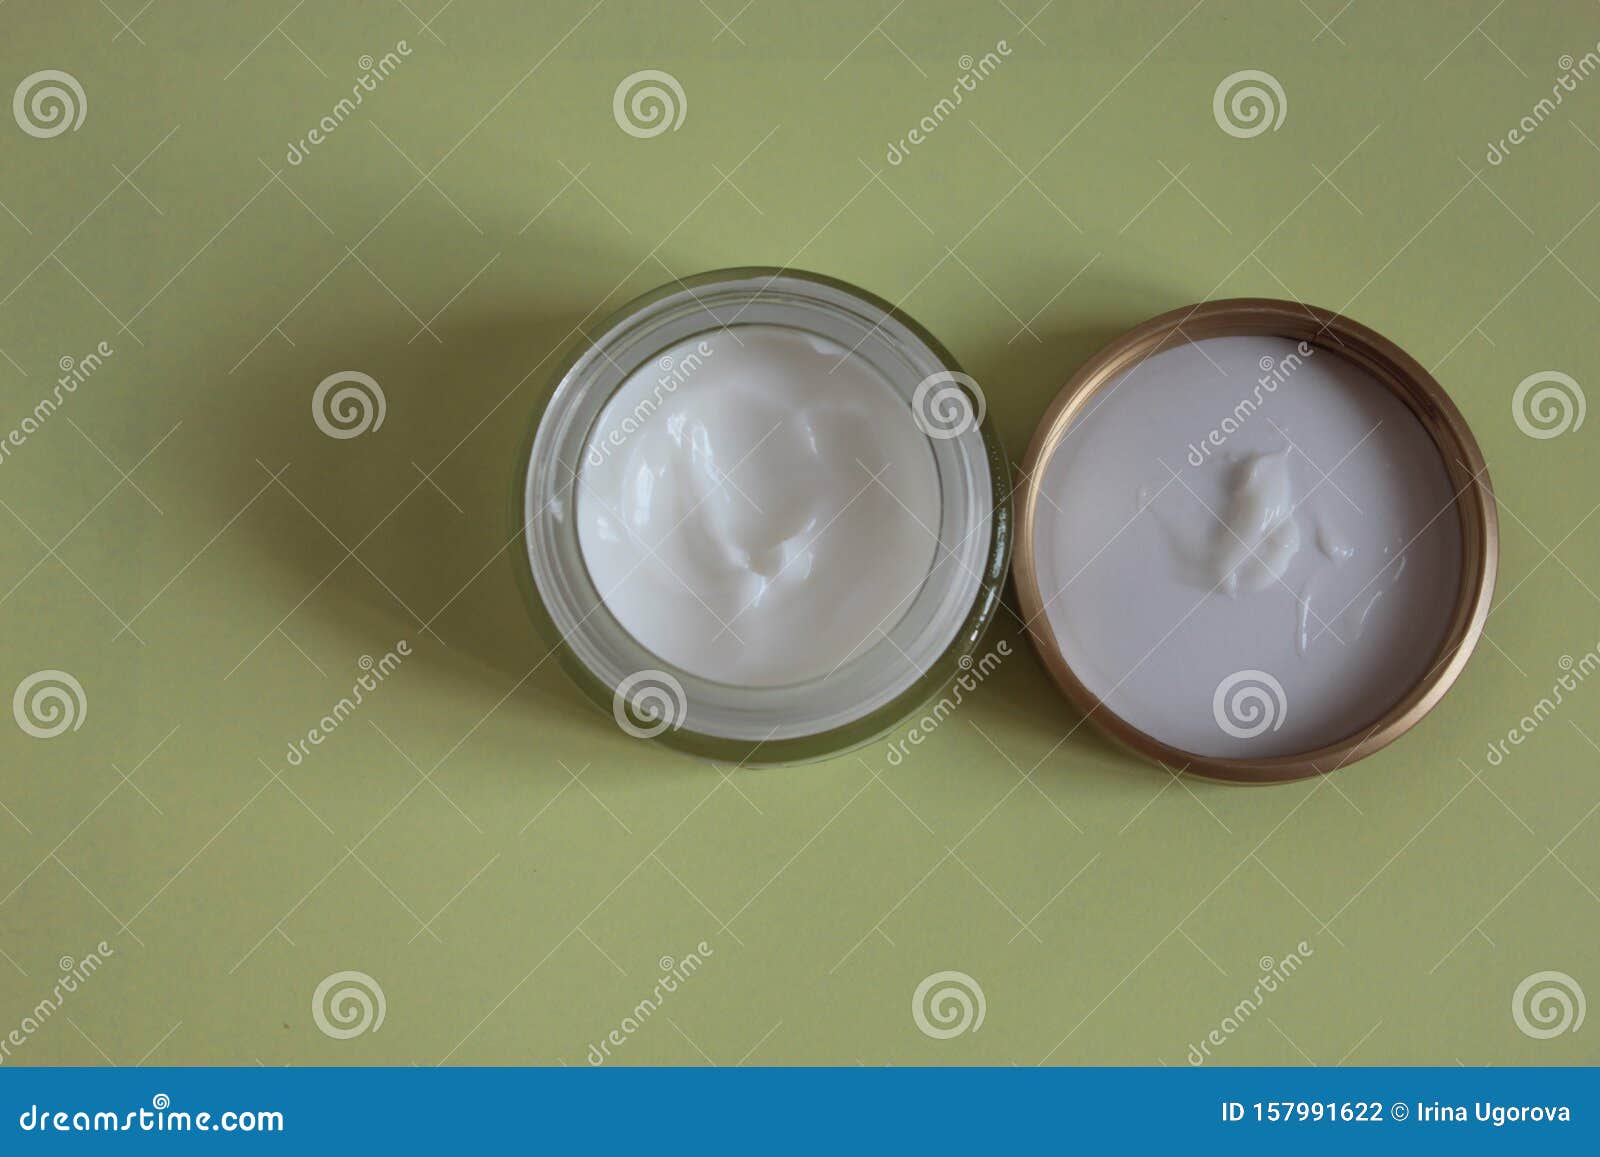 Download 7 244 Cream Jar Yellow Photos Free Royalty Free Stock Photos From Dreamstime Yellowimages Mockups